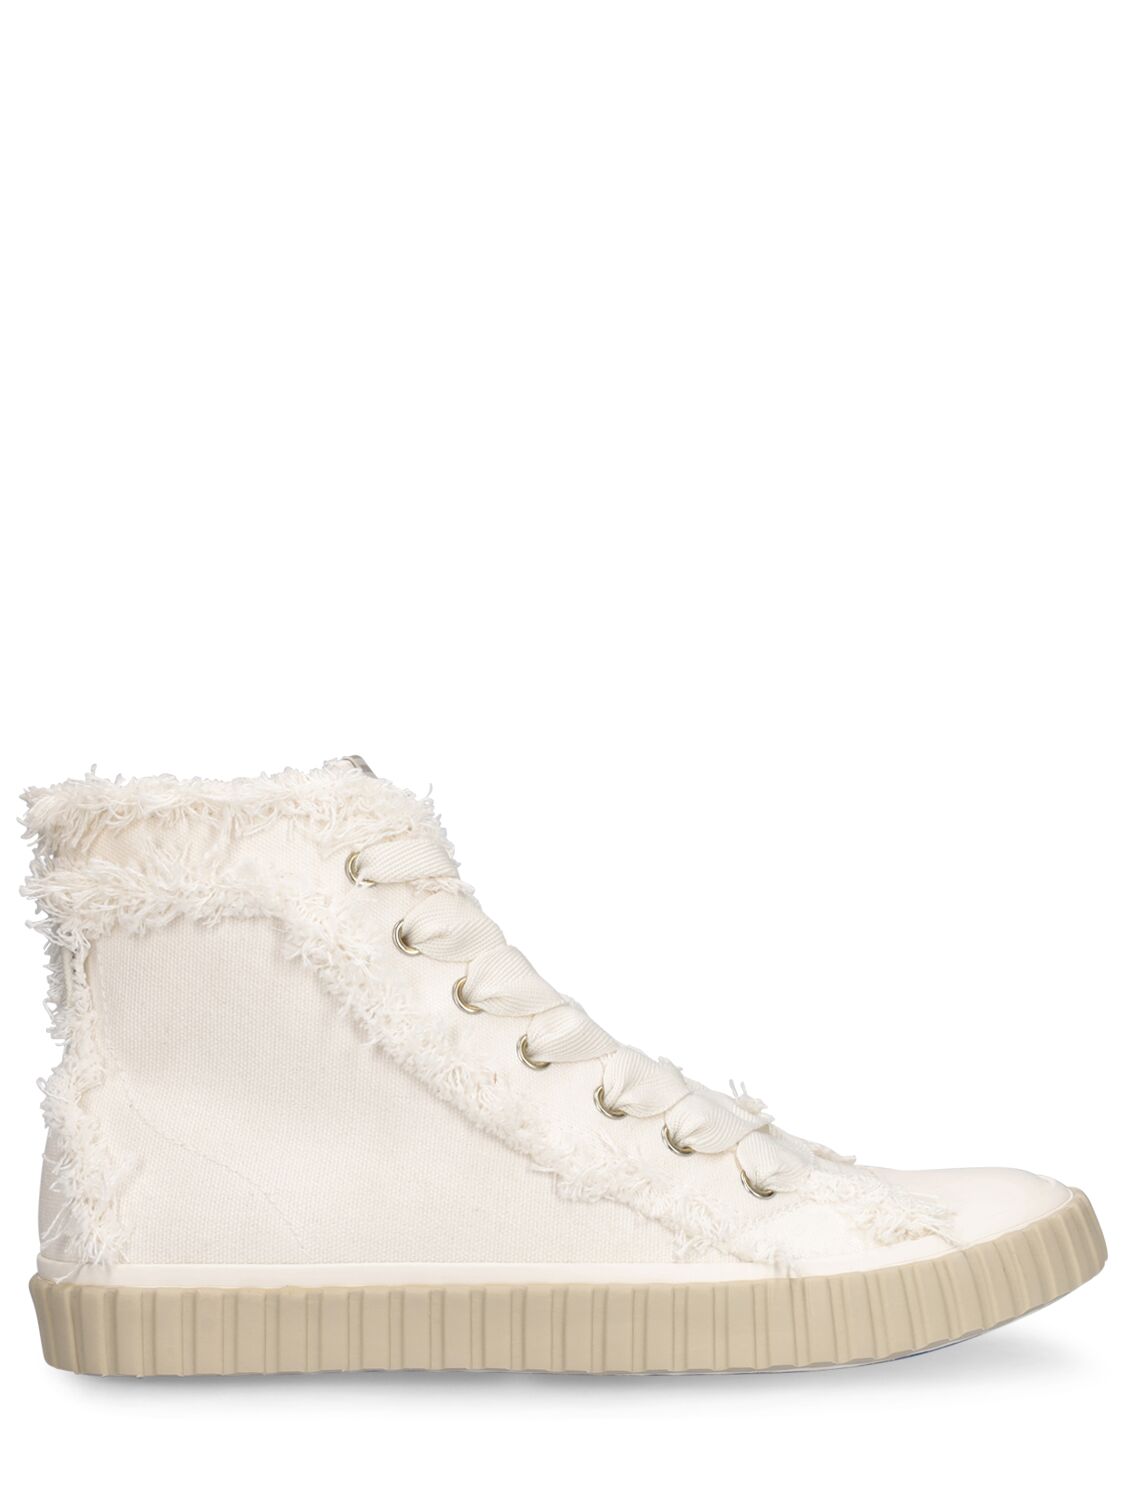 Cotton High Top Sneakers